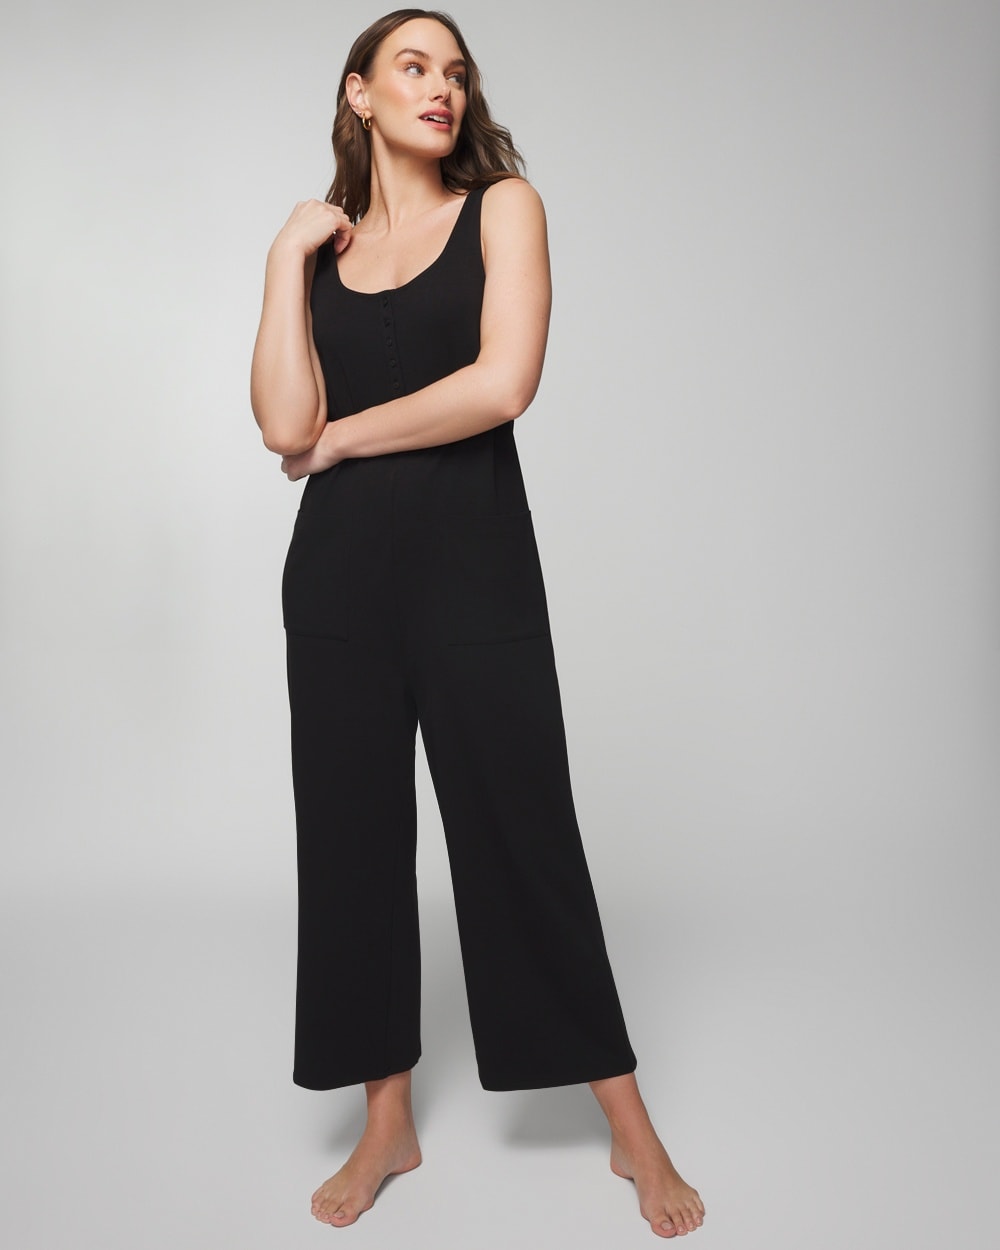 Most Loved Cotton Jumpsuit